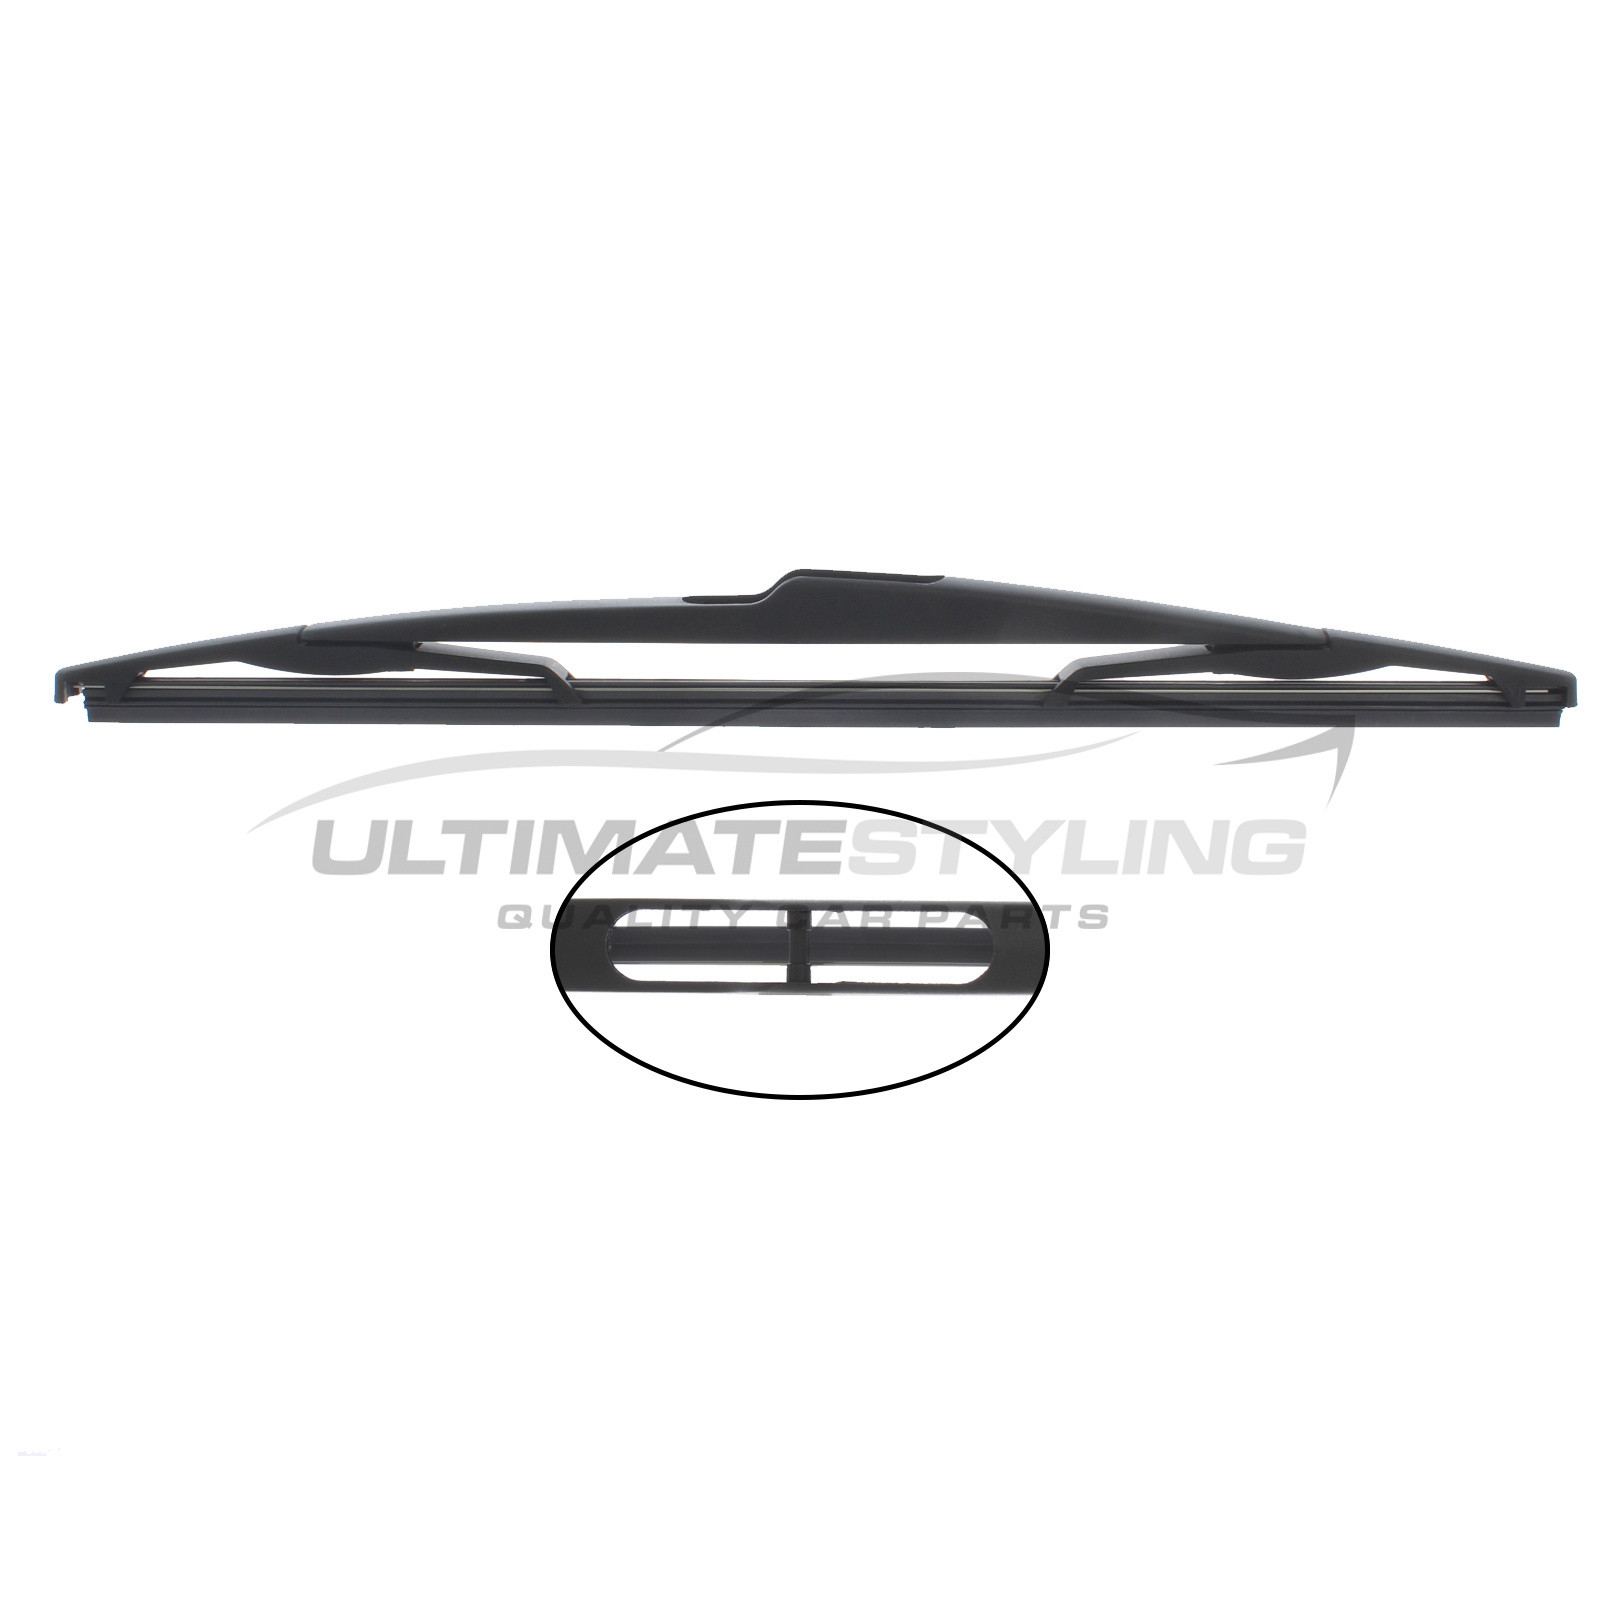 Rear Wiper Blade for Rover 75 Series